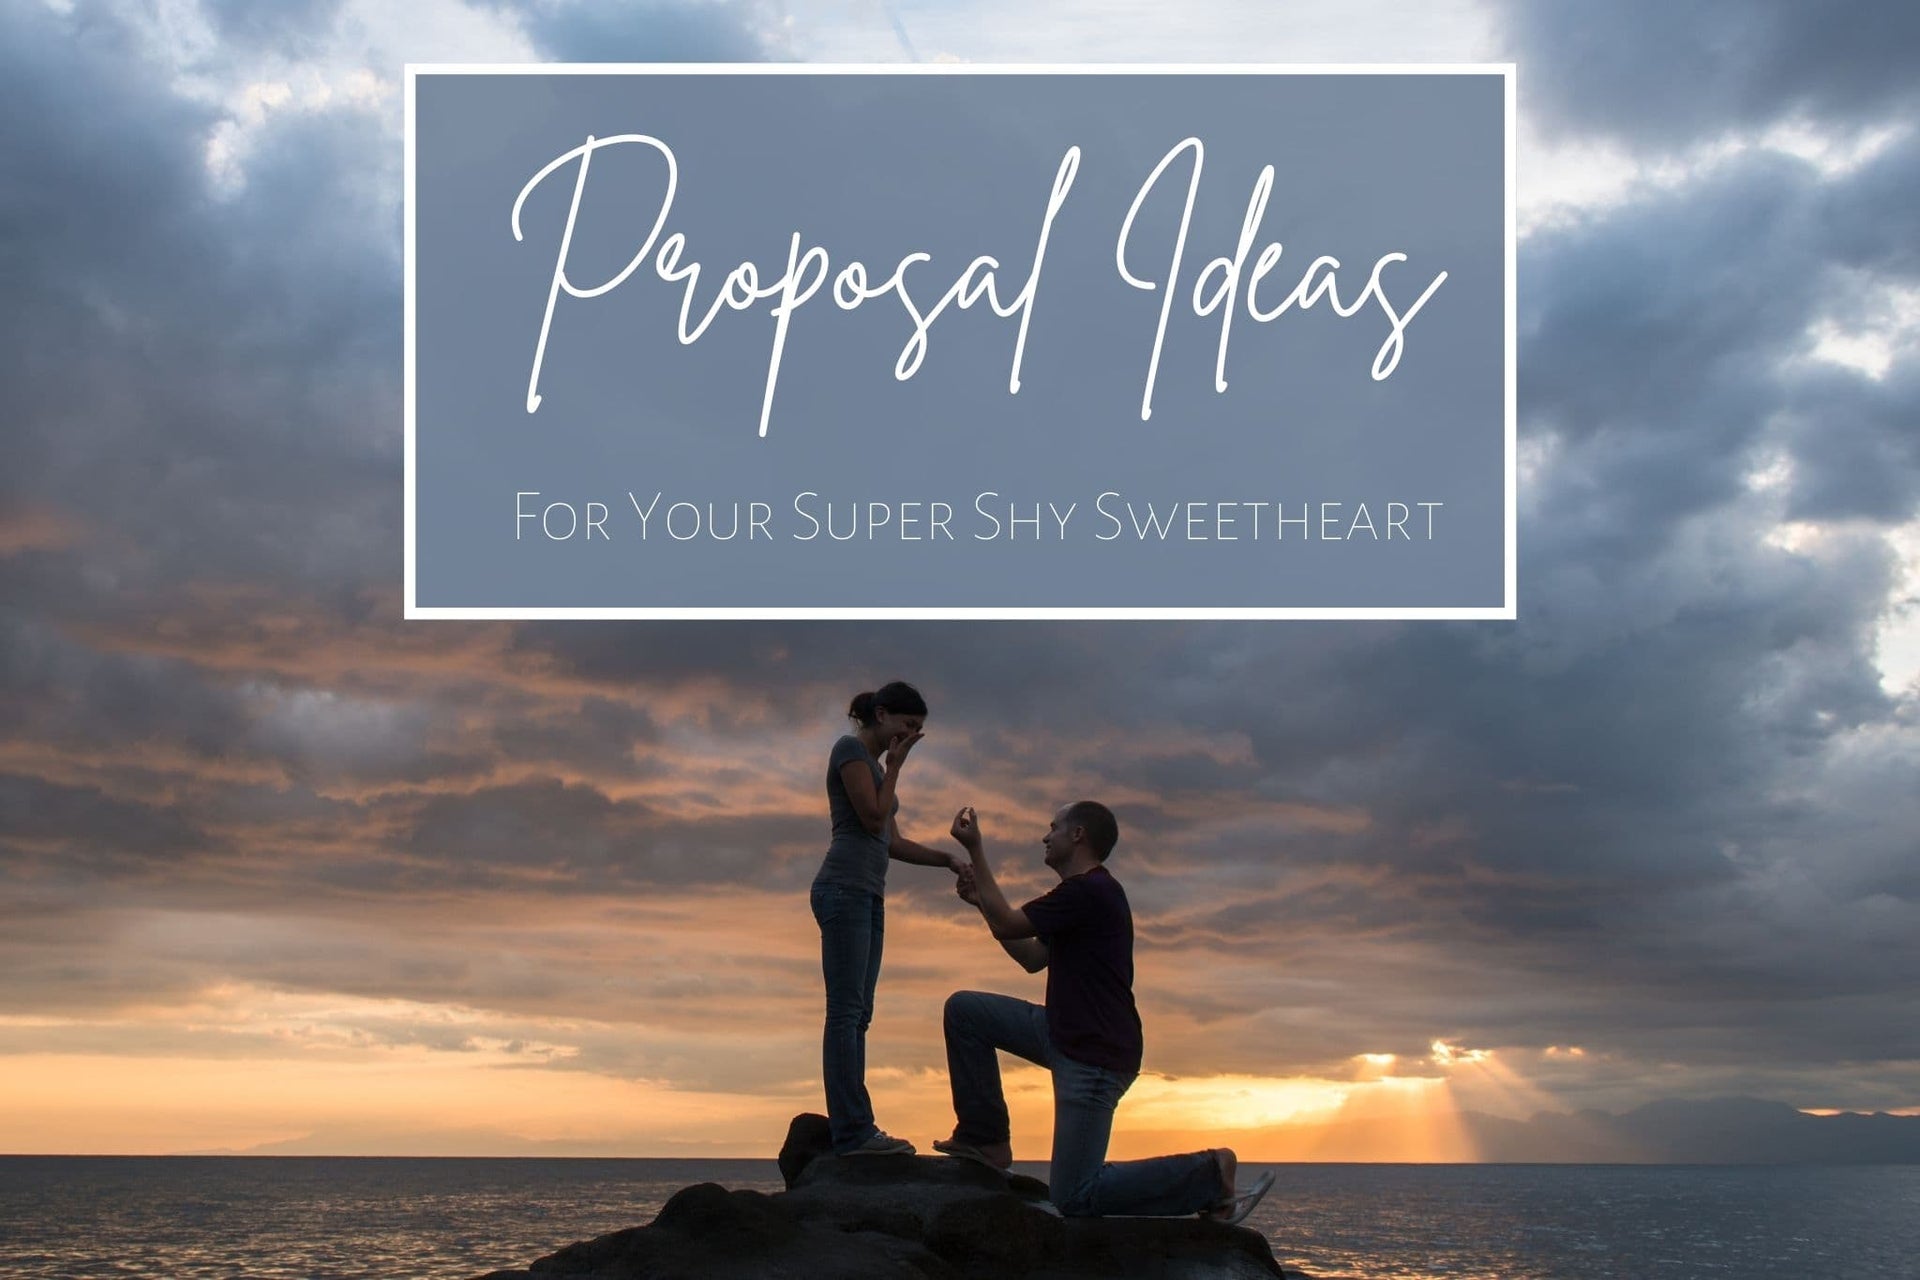 Proposal Ideas For Your Super Shy Sweetheart